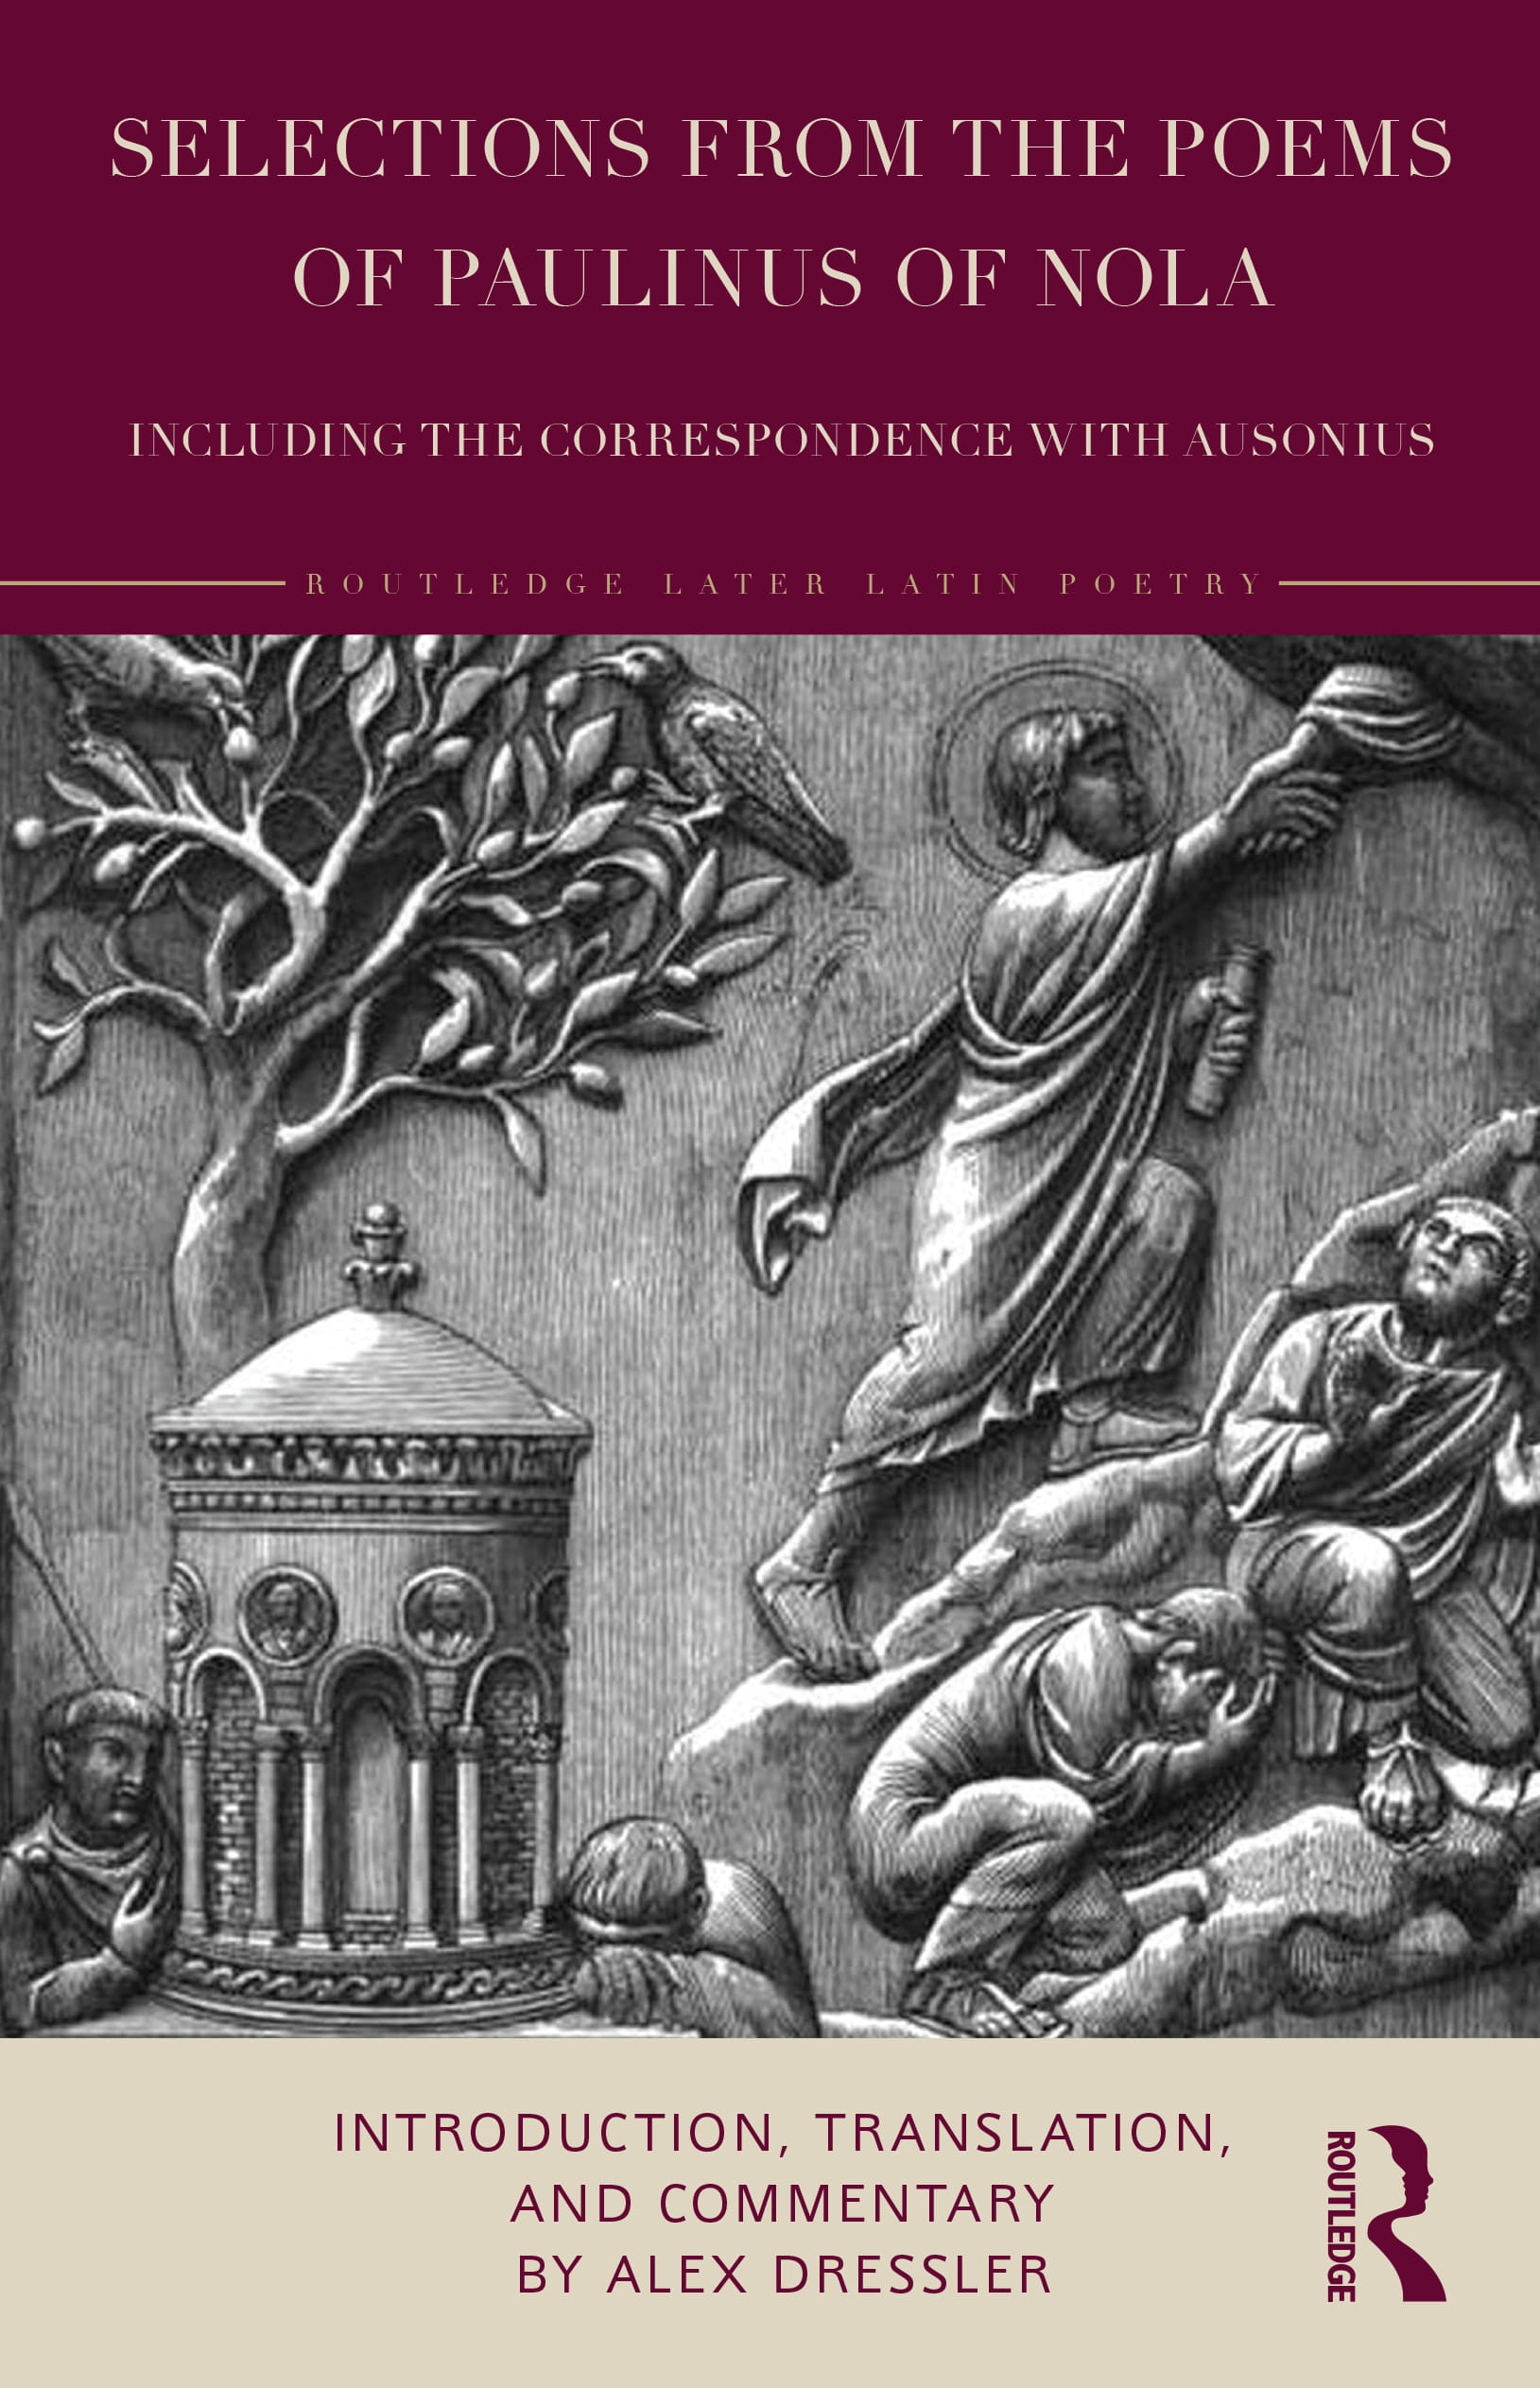 Selections from the Poems of Paulinus of Nola, Including the Correspondence with Ausonius: Introduction, Translation, Commentary